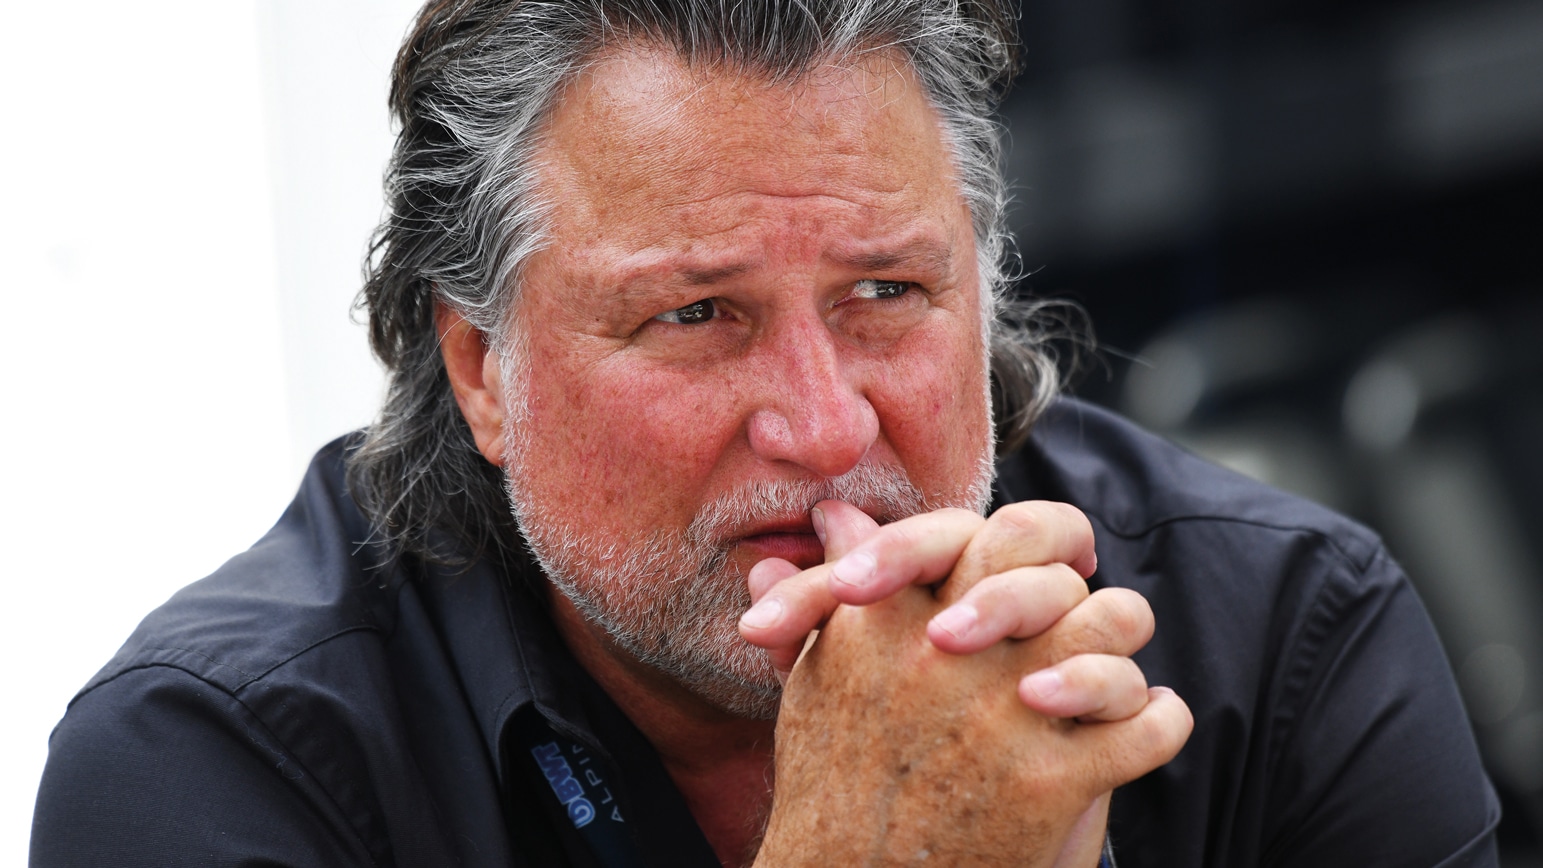 No space for Andretti on the Formula 1 grid – but is this a case of anti-Americanism?